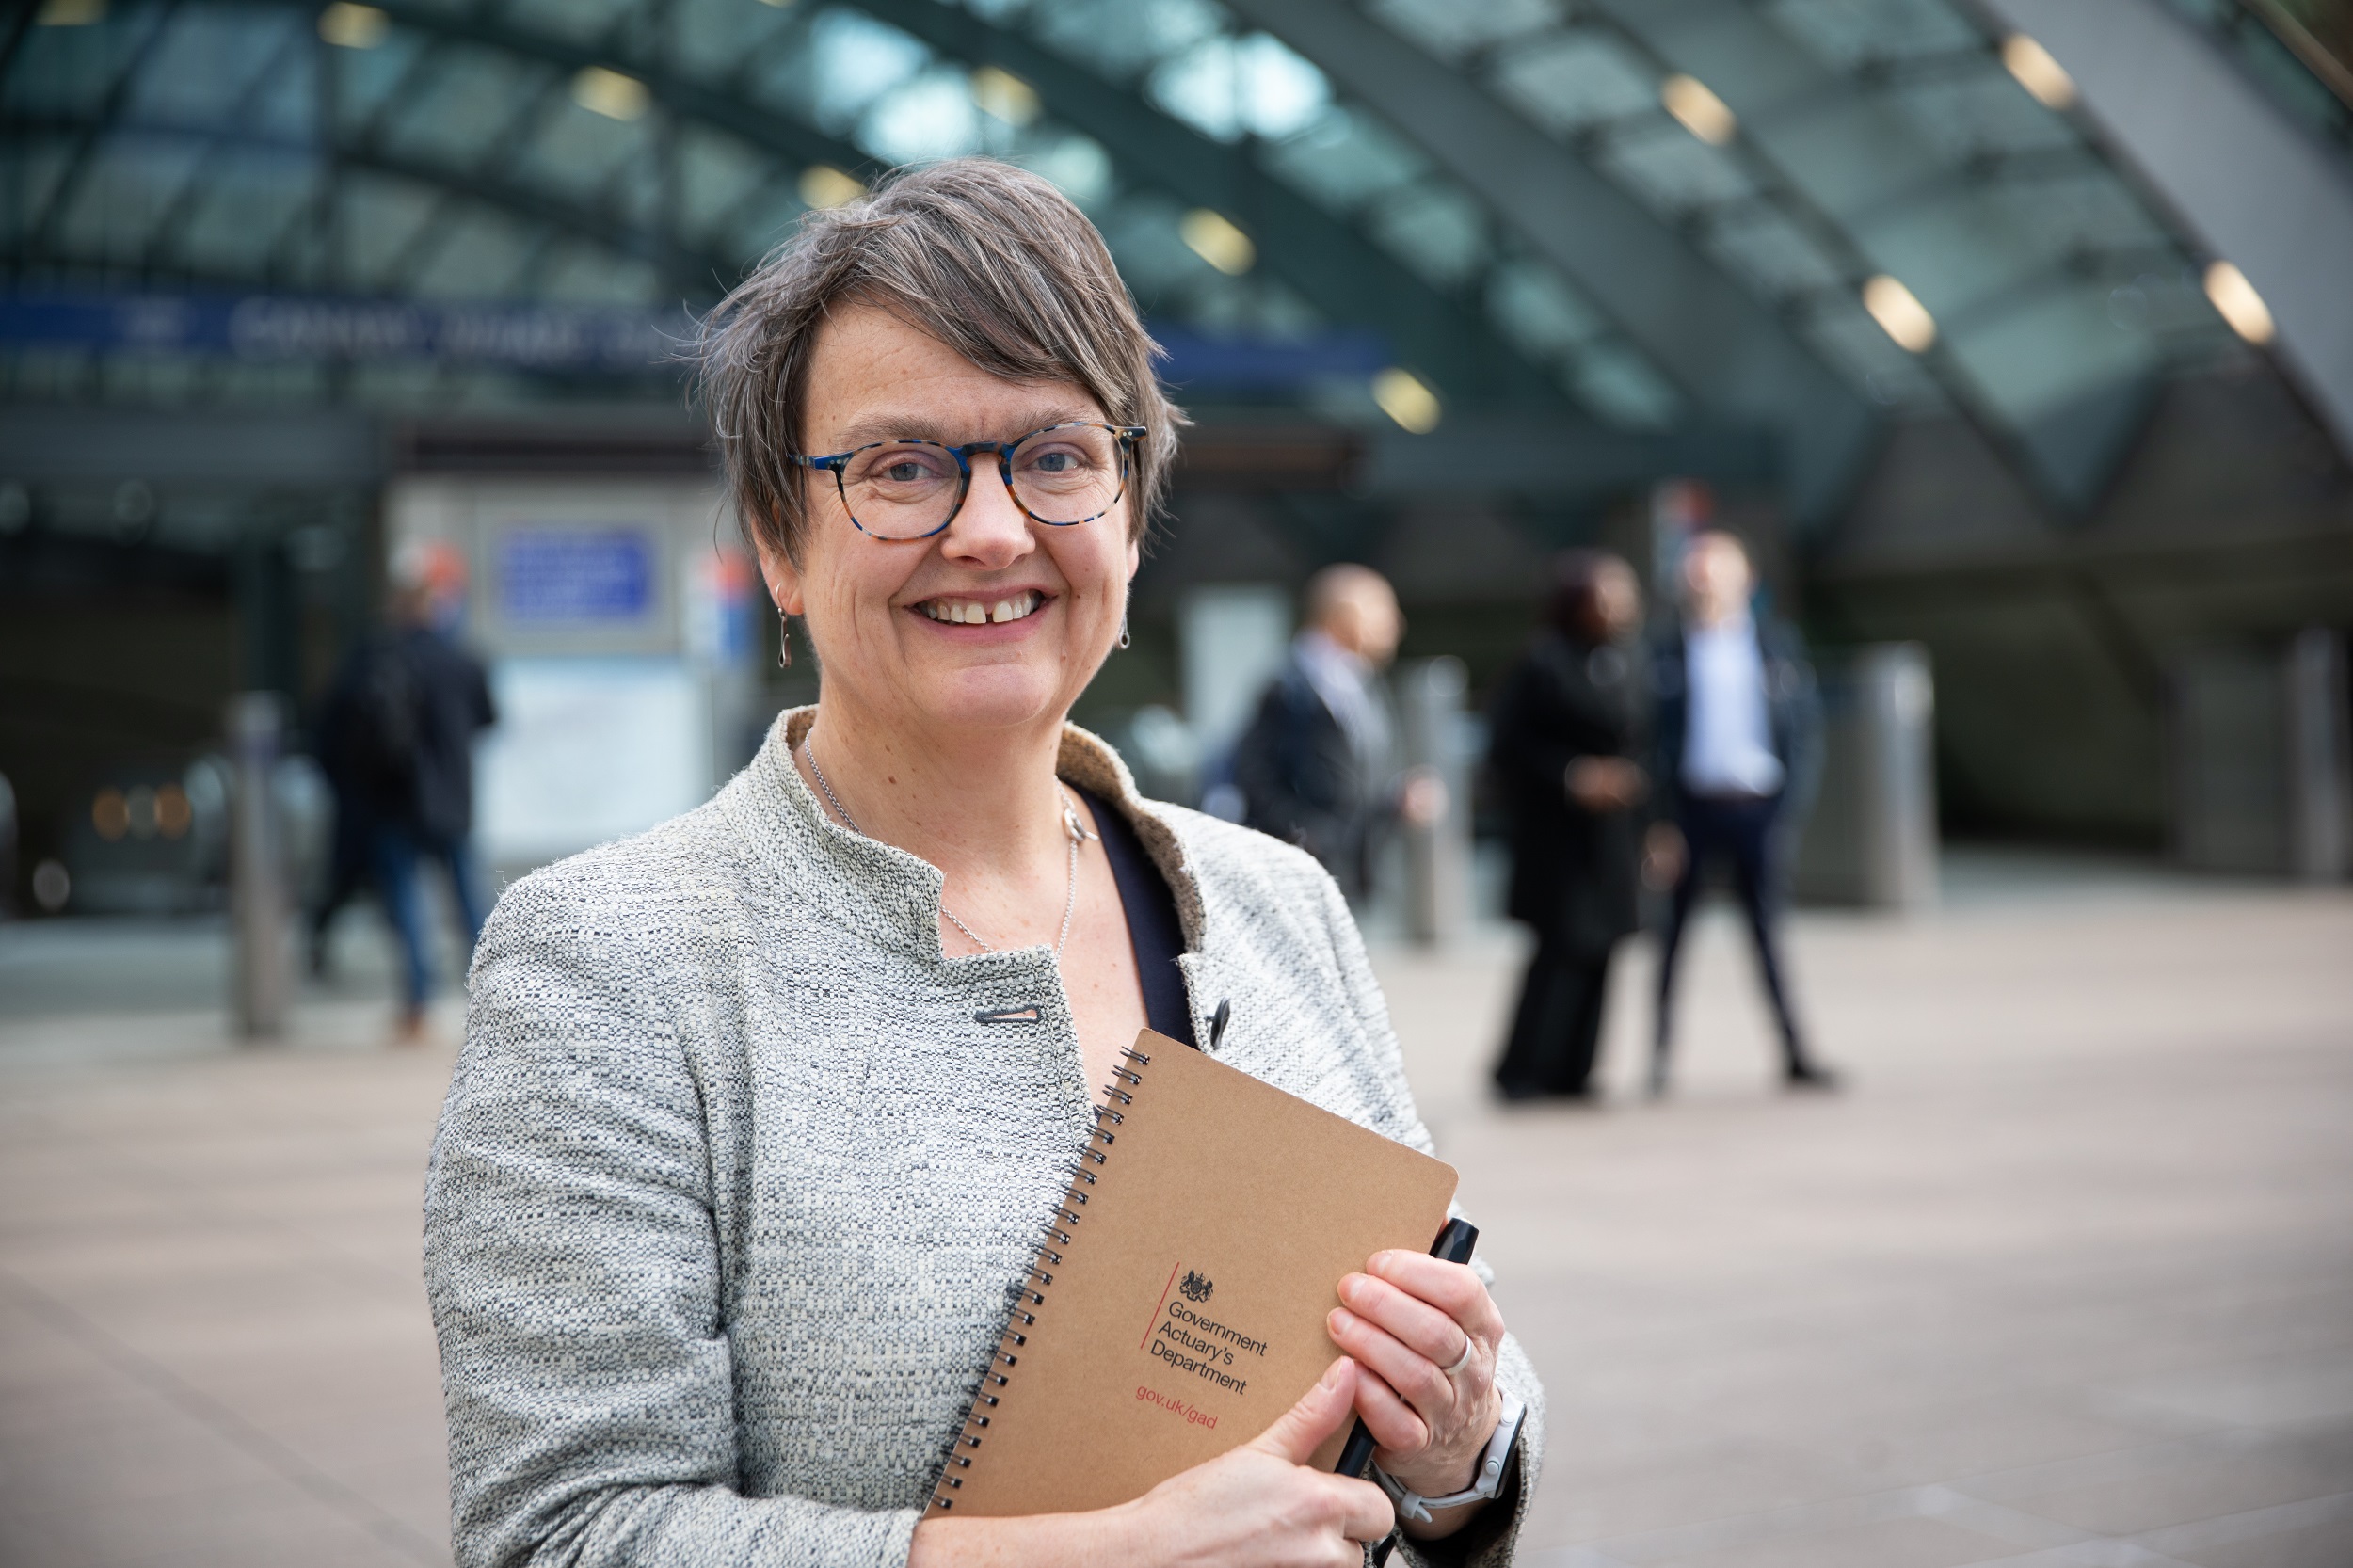 Fiona Dunsire, the Government Actuary holds a notebook with the Government Actuary's Department logo on it. Fiona is outside a London Underground station.